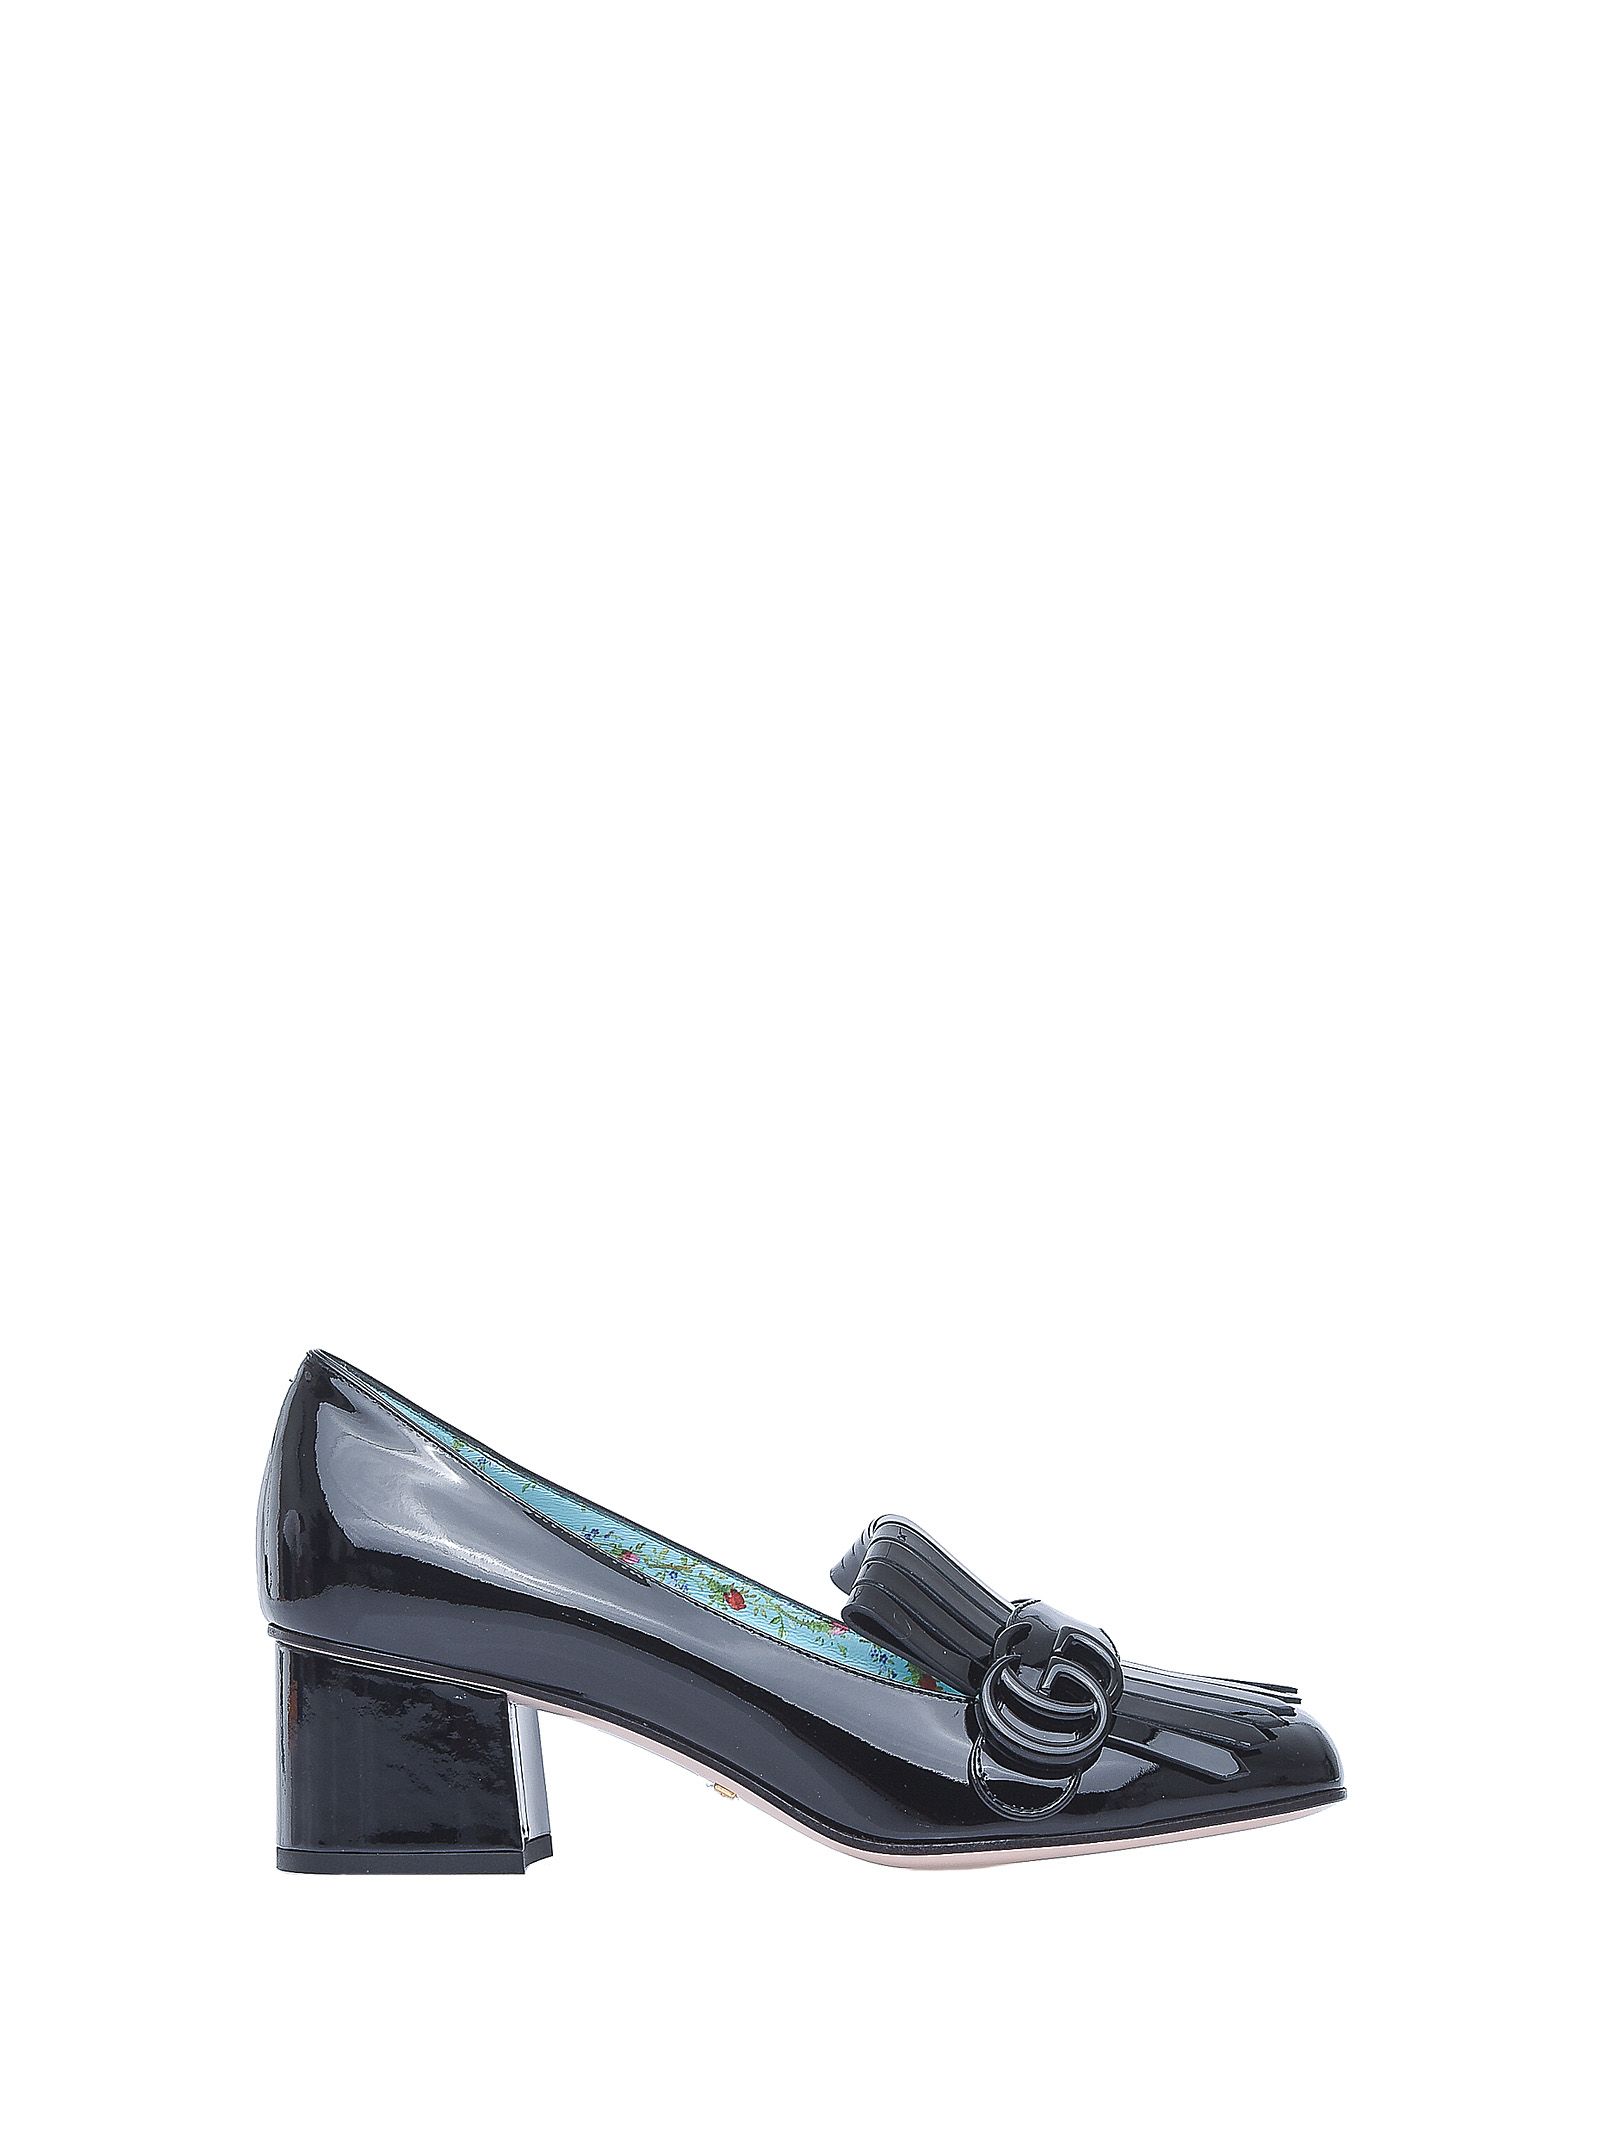 GUCCI Marmont Gg Patent Leather Loafer Pumps in Black | ModeSens